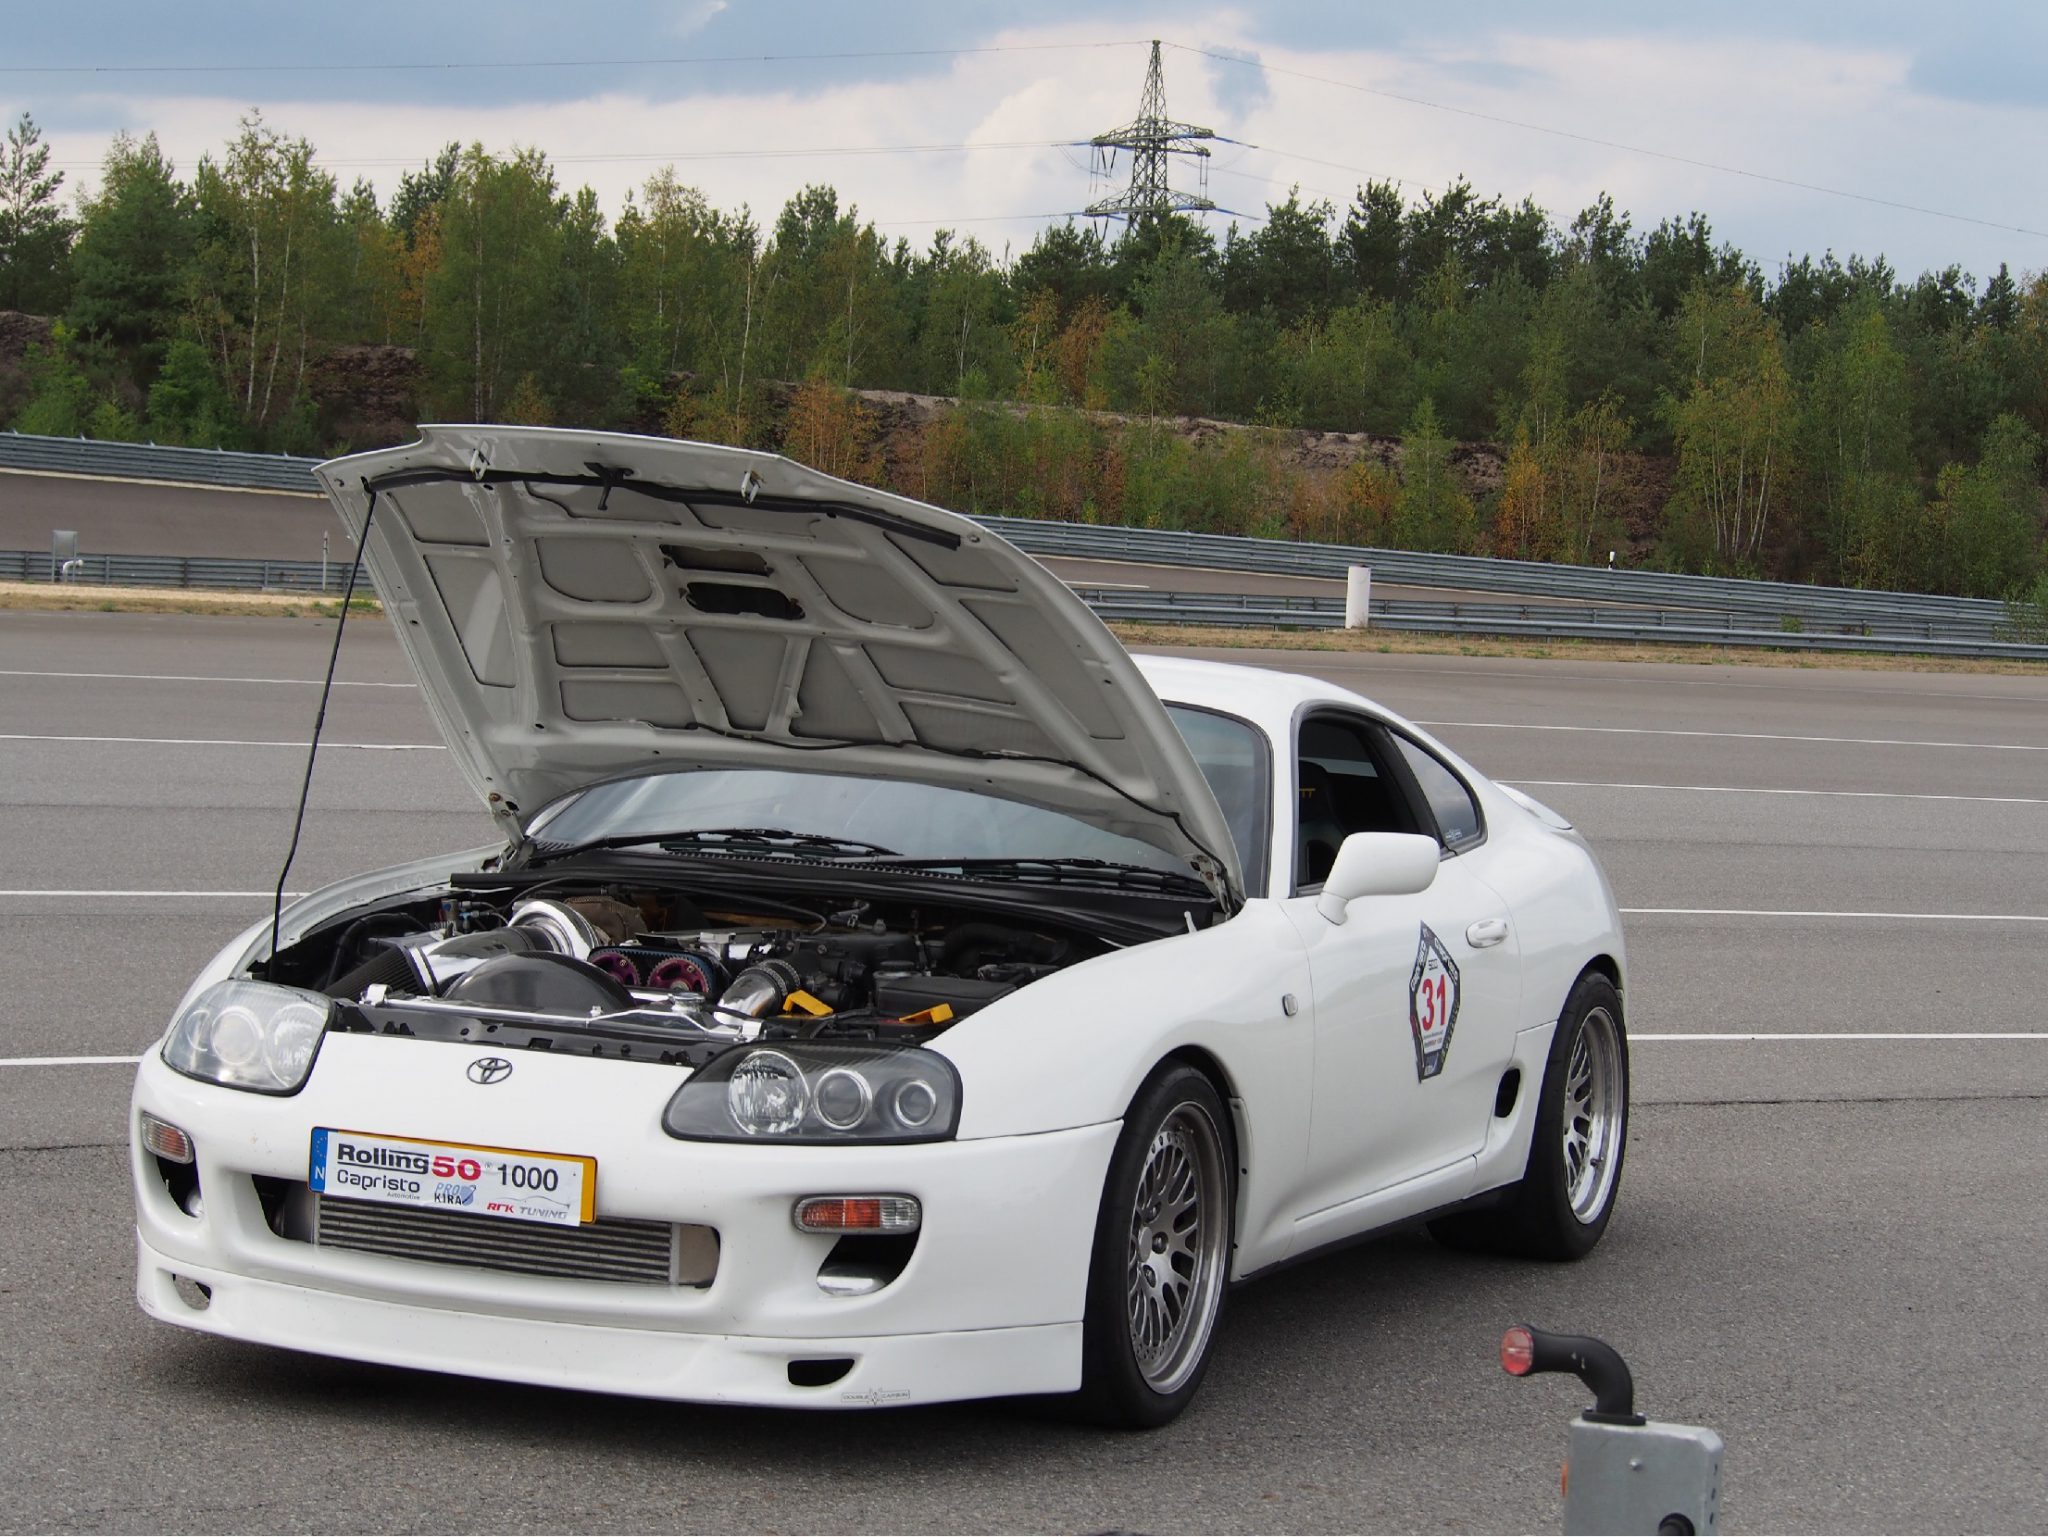 FEATURE Mario's 1300+HP 2JZ Toyota Supra MK4 Turbo and